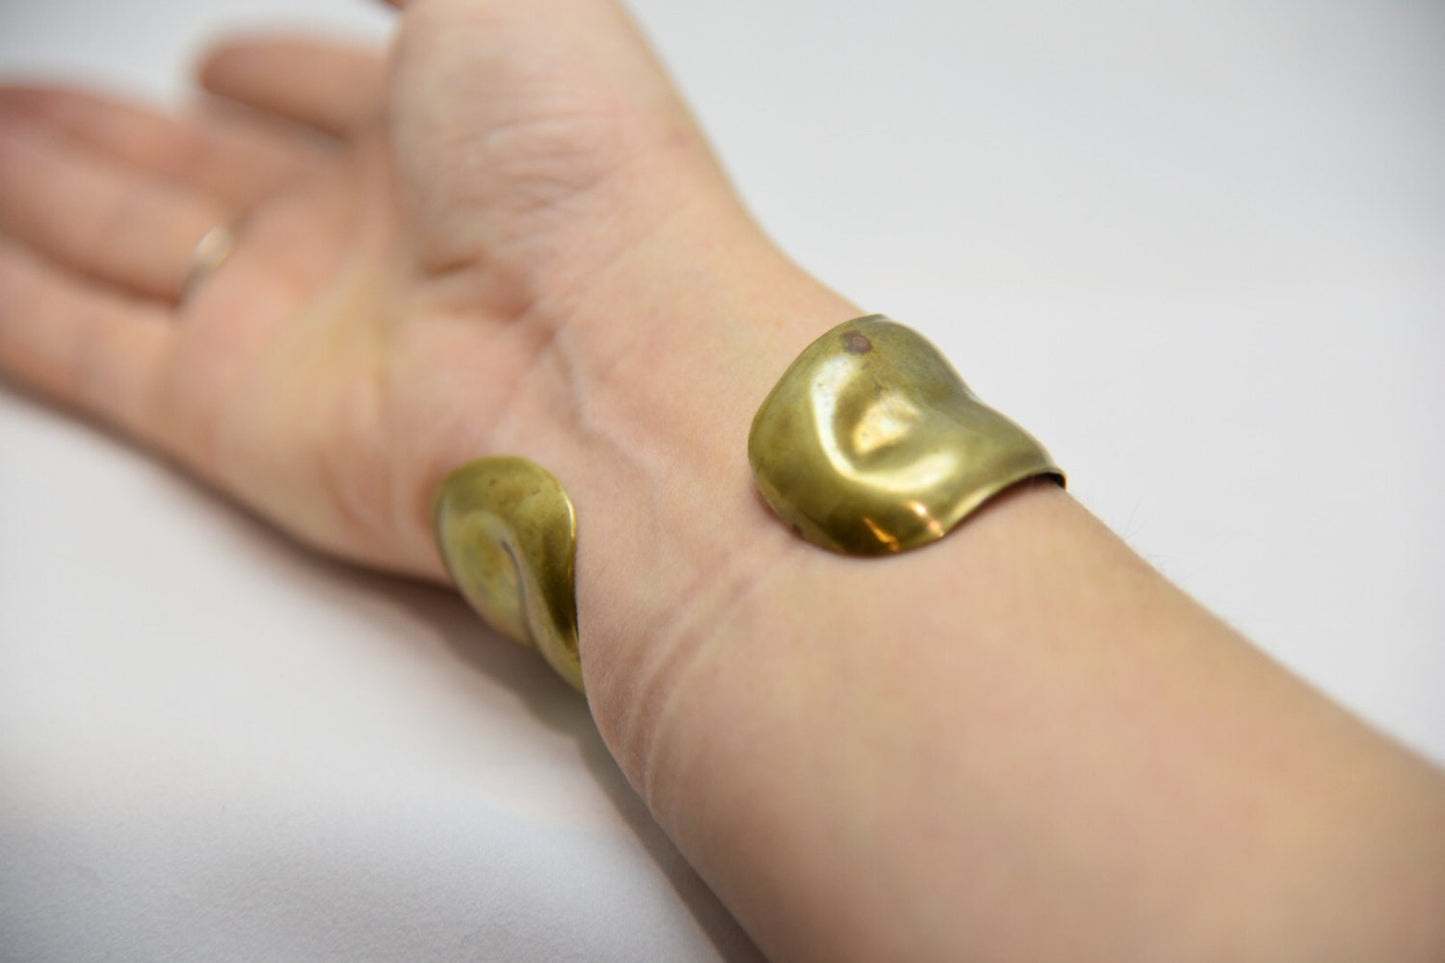 SALE Vintage Asymmetrical Brass Cuff Bracelet, hand hammered and formed c.1960